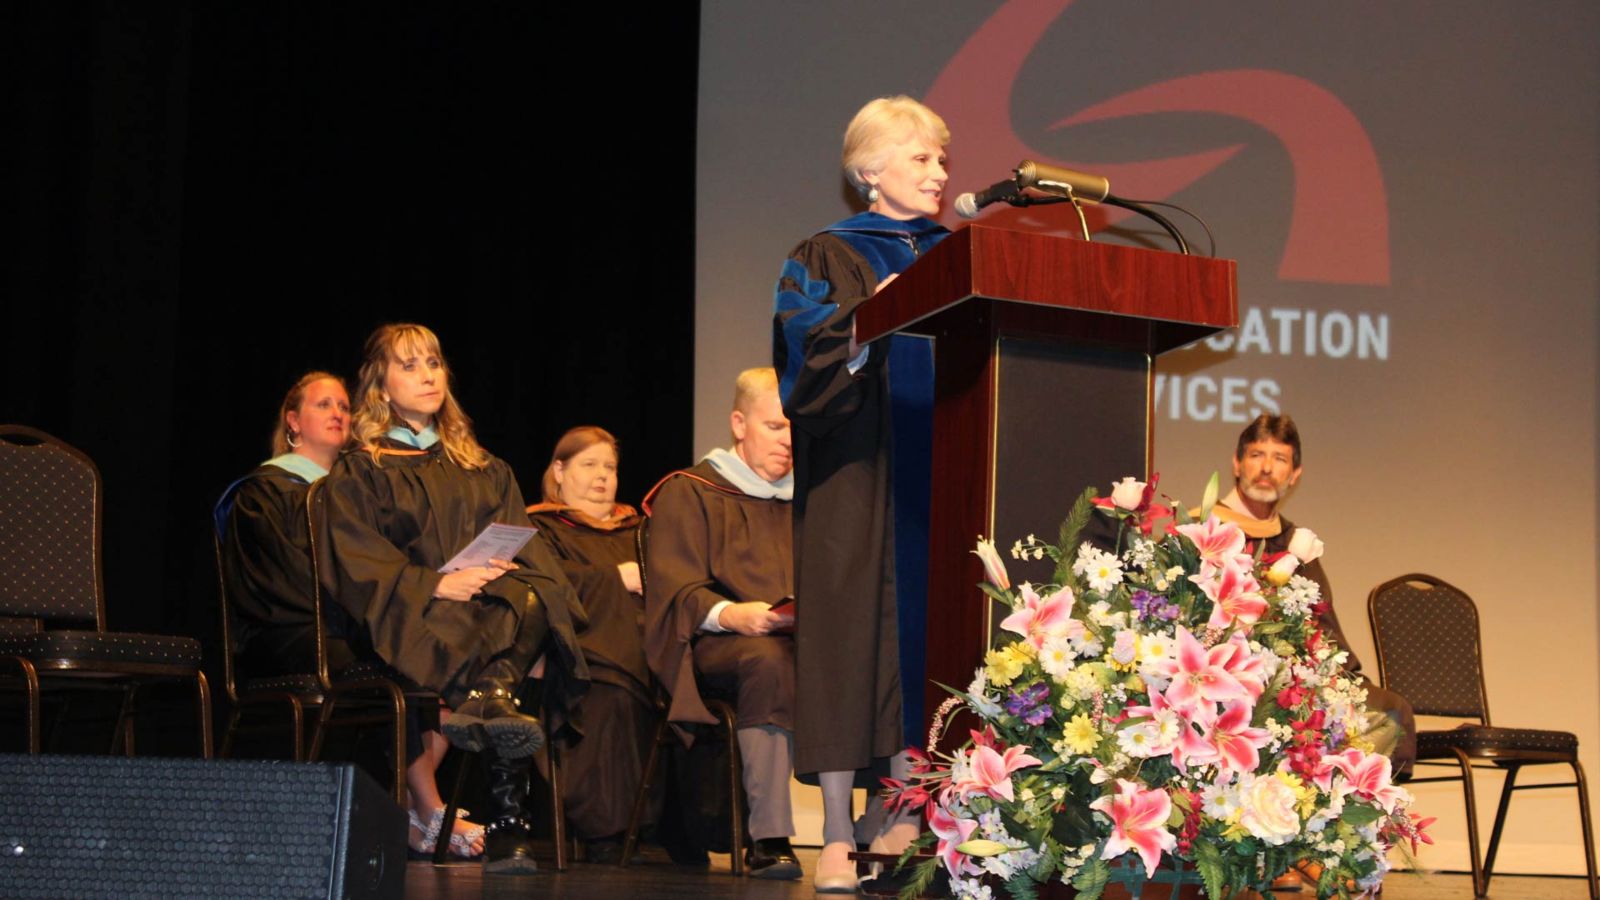 Dr. Kathy Murphy speaks to the graduates and audience during a ceremony held April 11 at the Oxford Performing Arts Center